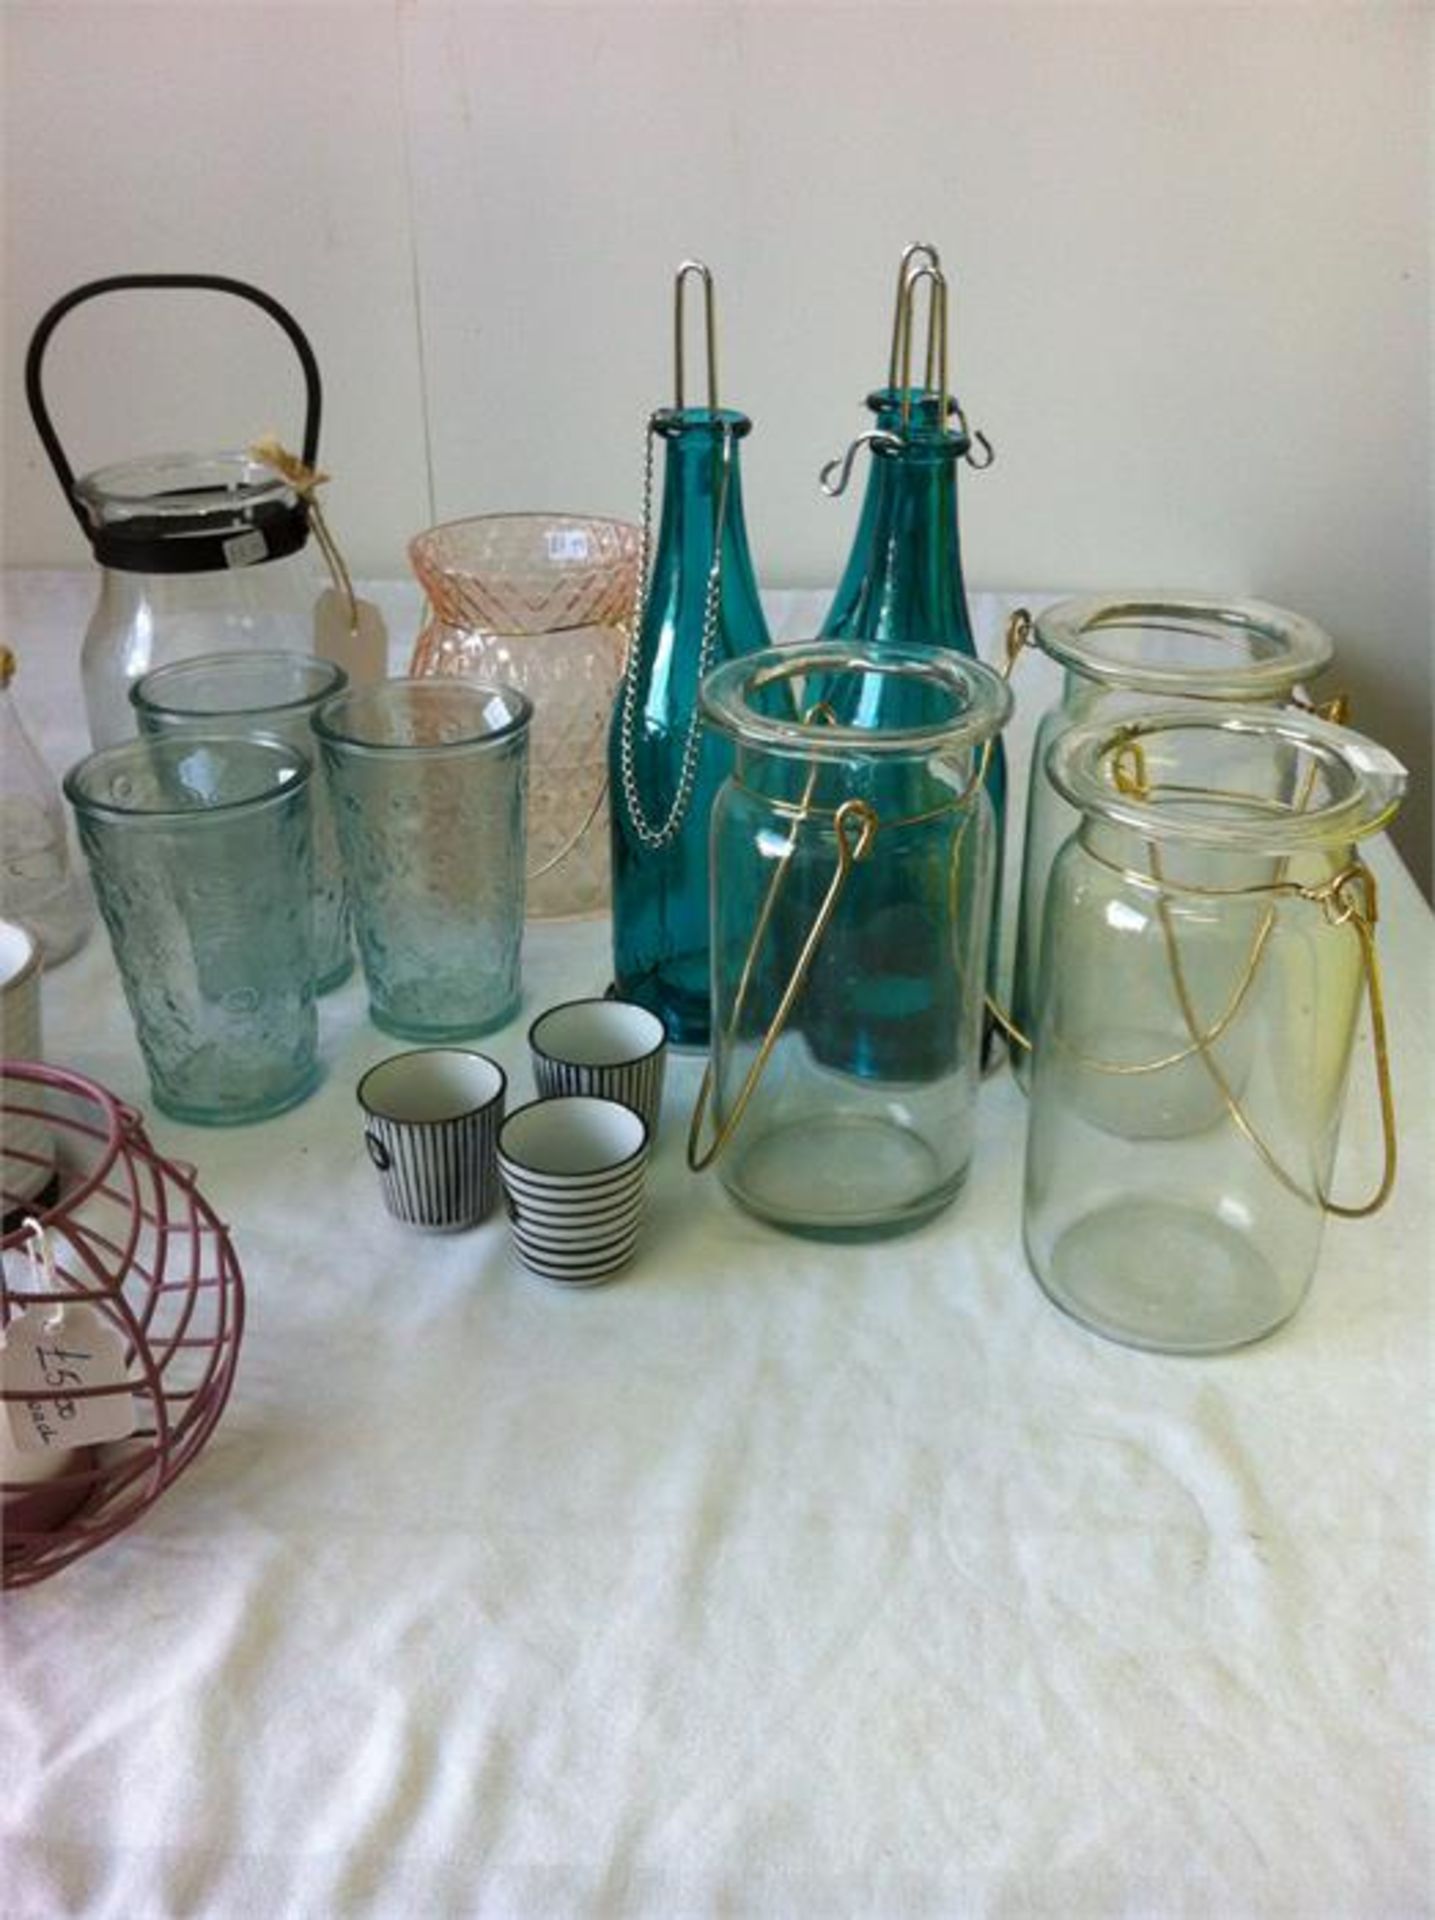 Approximately 35 glass/cage/bottle style tealight/candle holders, Large glass cake dome, 4 x glass c - Image 4 of 8